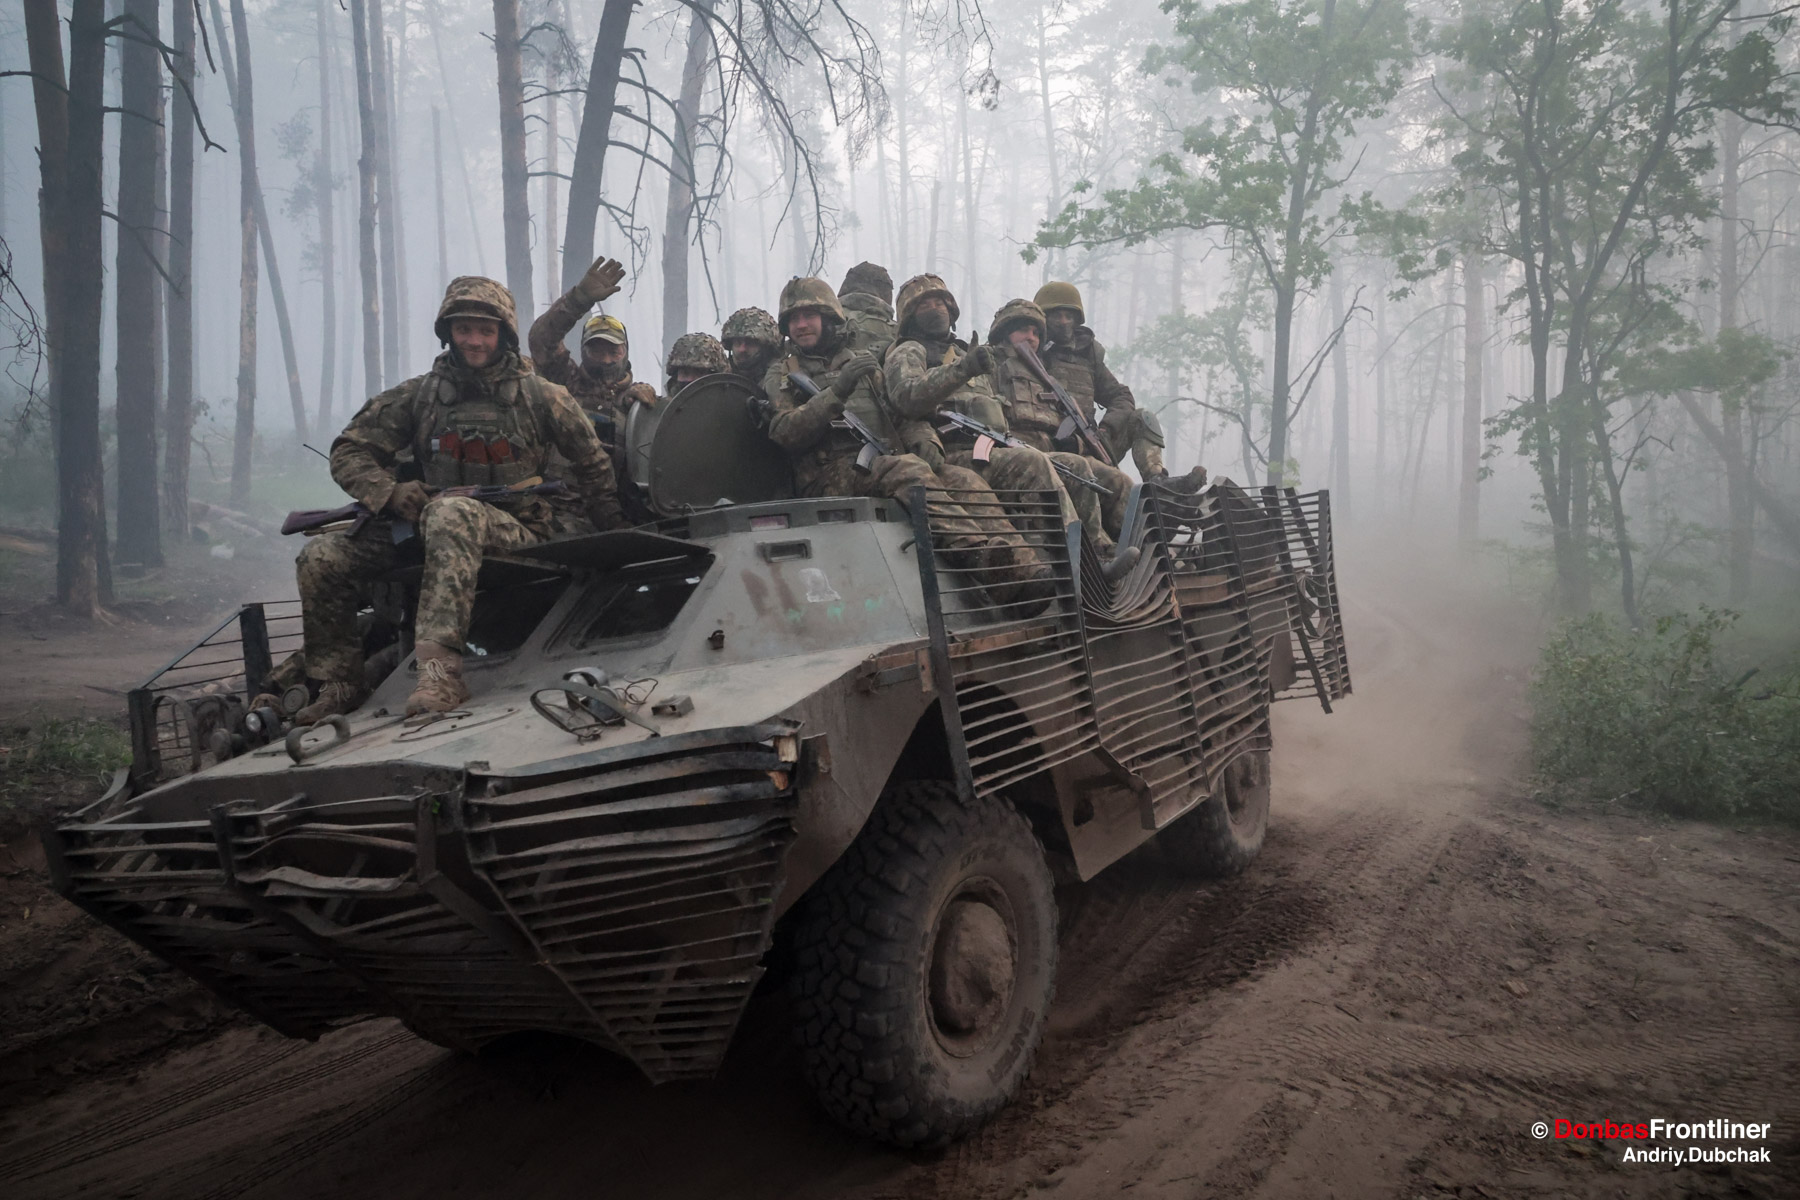 Donbas Frontliner, Kreminna, forest, war in forest, Ukrainian soldiers drive BMP, infantry, russian invasion, Andriy Dubchak